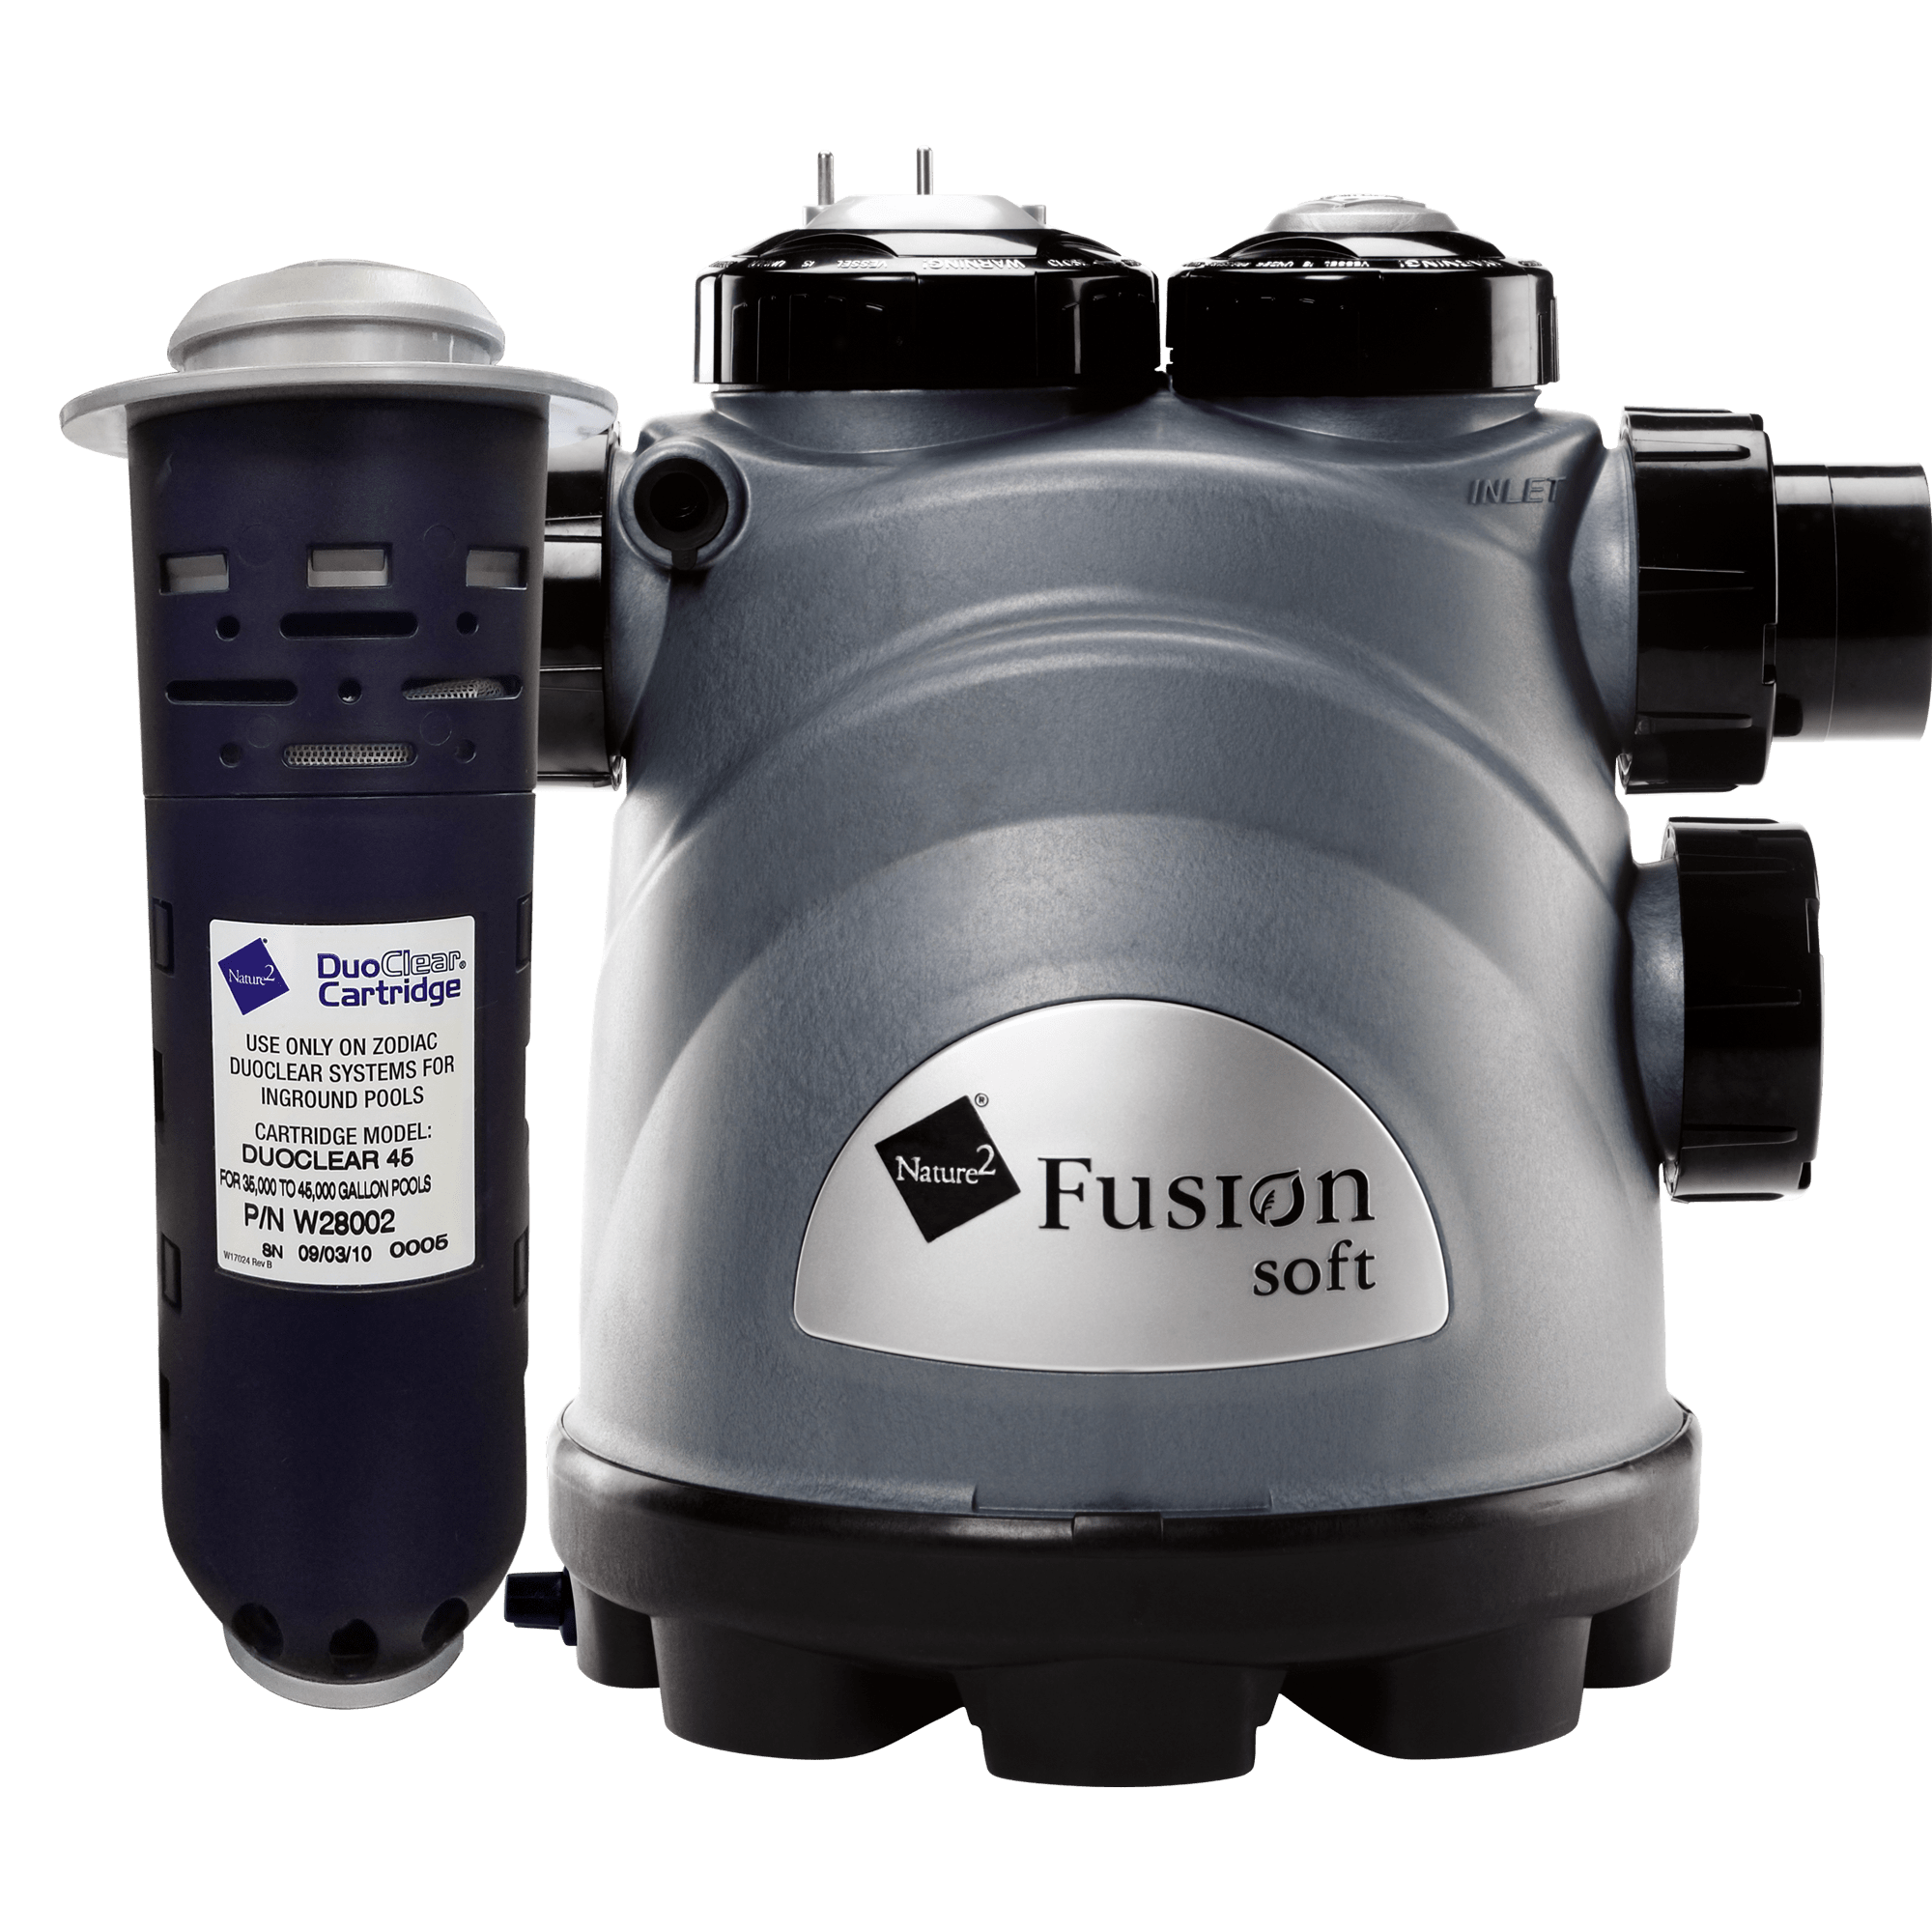 Nature2 Fusion Soft Saltwater System